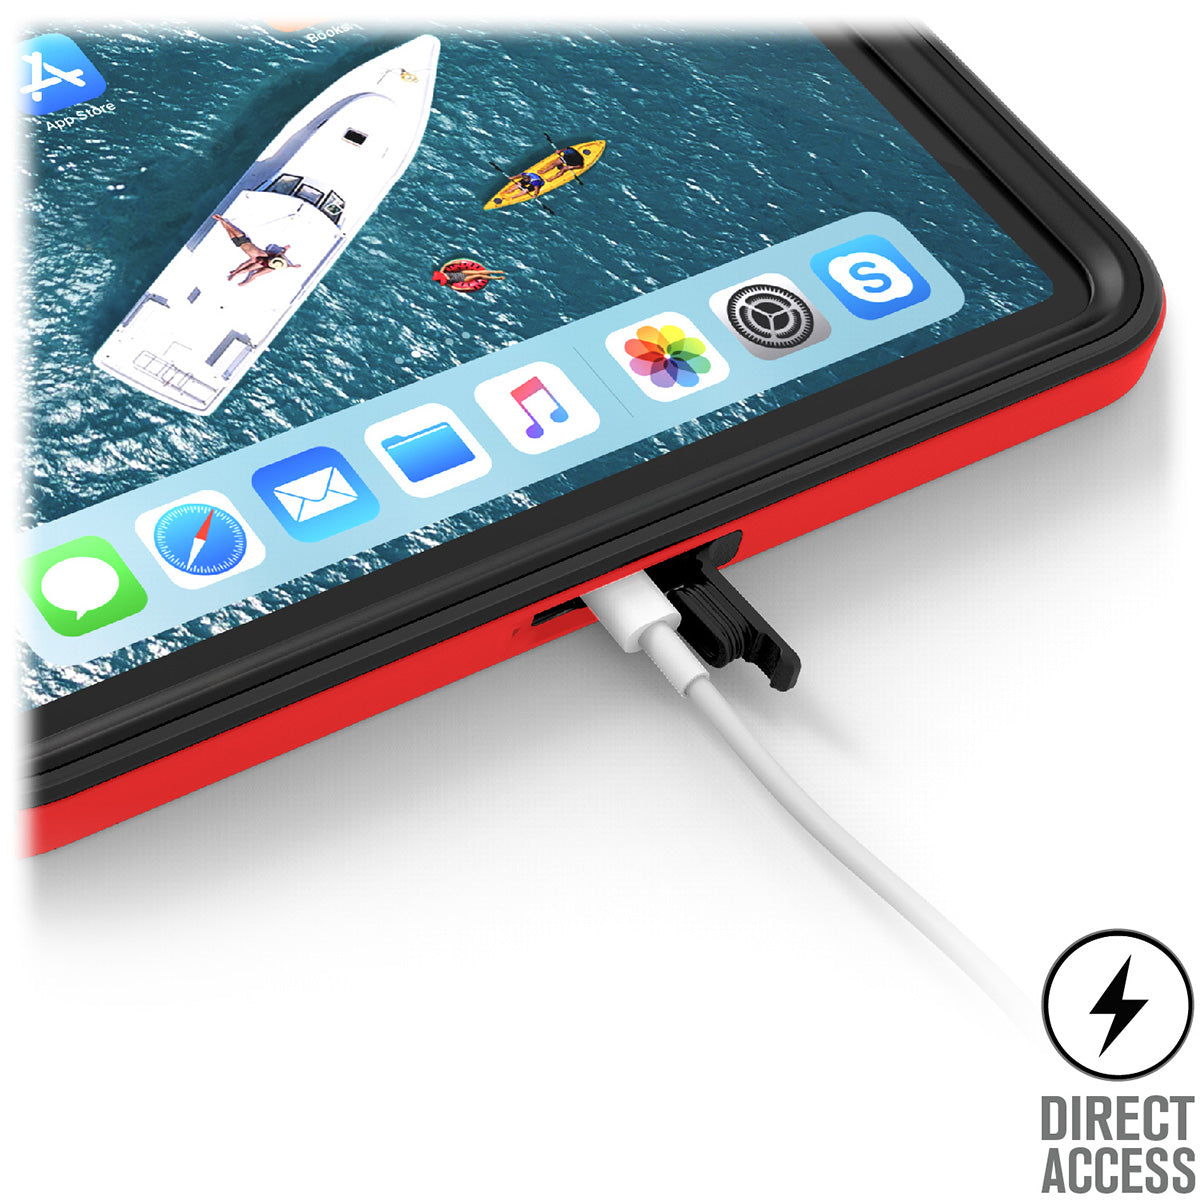 Catalyst waterproof case for ipad pro gen 3 12.9in charging port Text reads direct access 